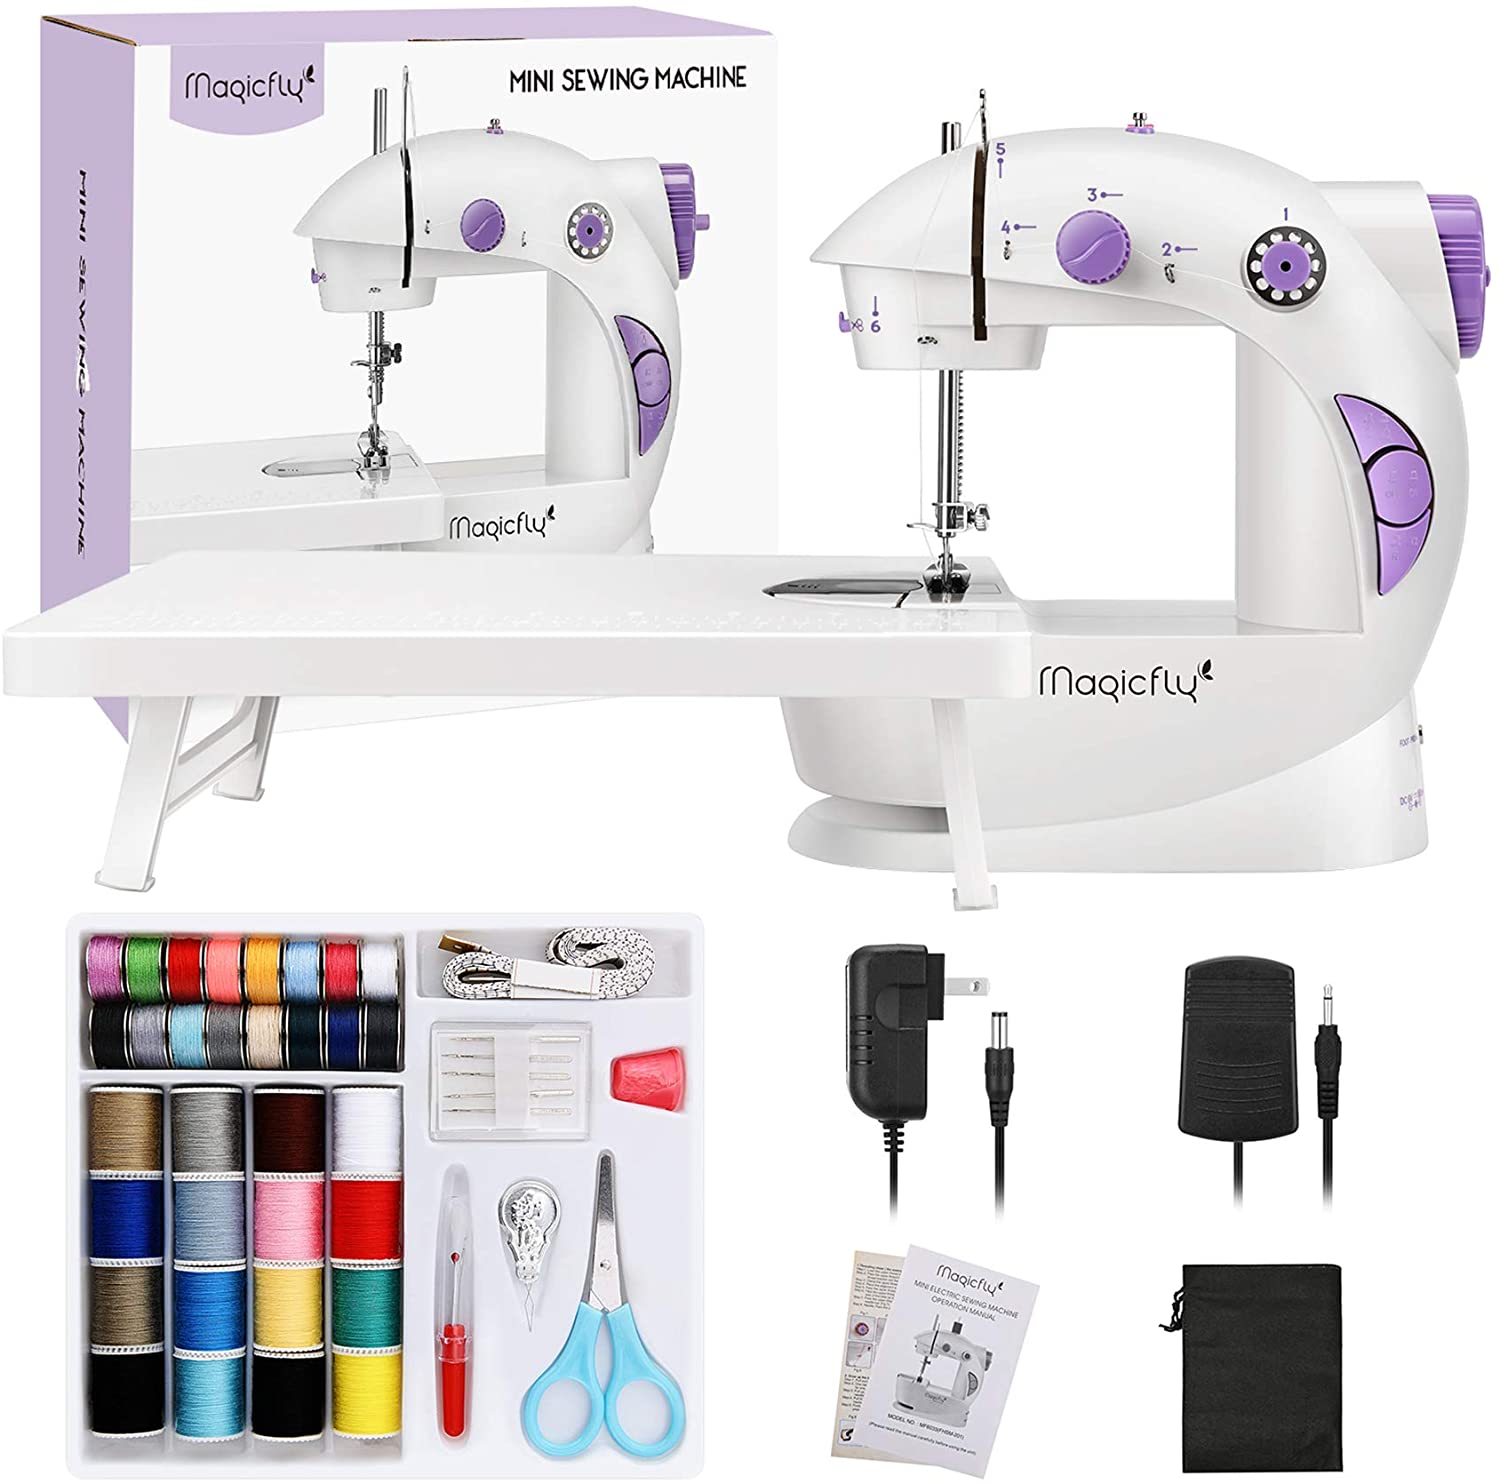 magicfly mini sewing machine for beginner with accessories